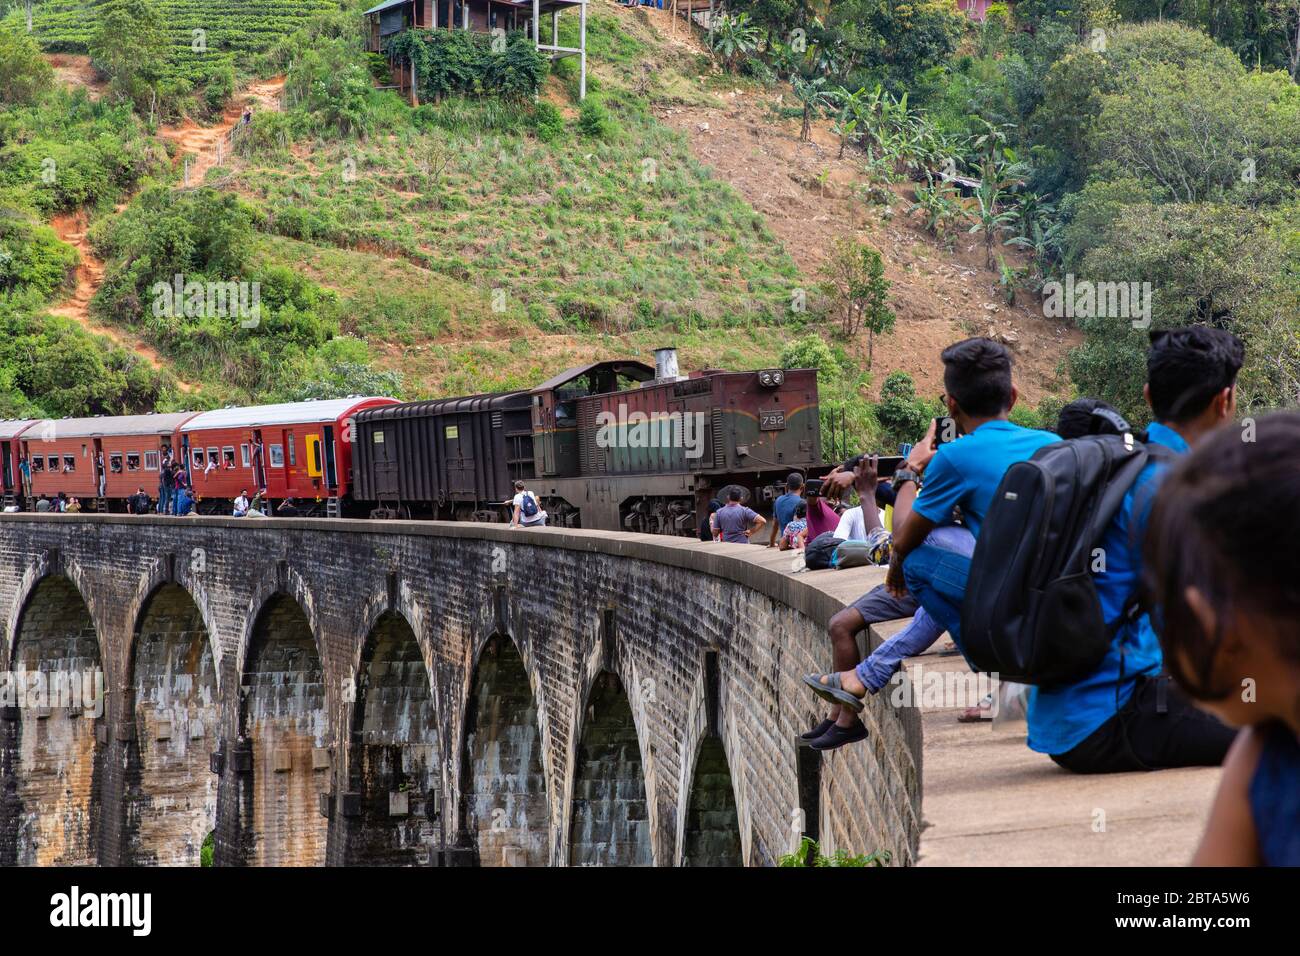 Nine arch bridge crossing. Part of the scenic trip to Ella from Nanu Oya.  Cameras are trained both out from the windows and towards the train Stock  Photo - Alamy